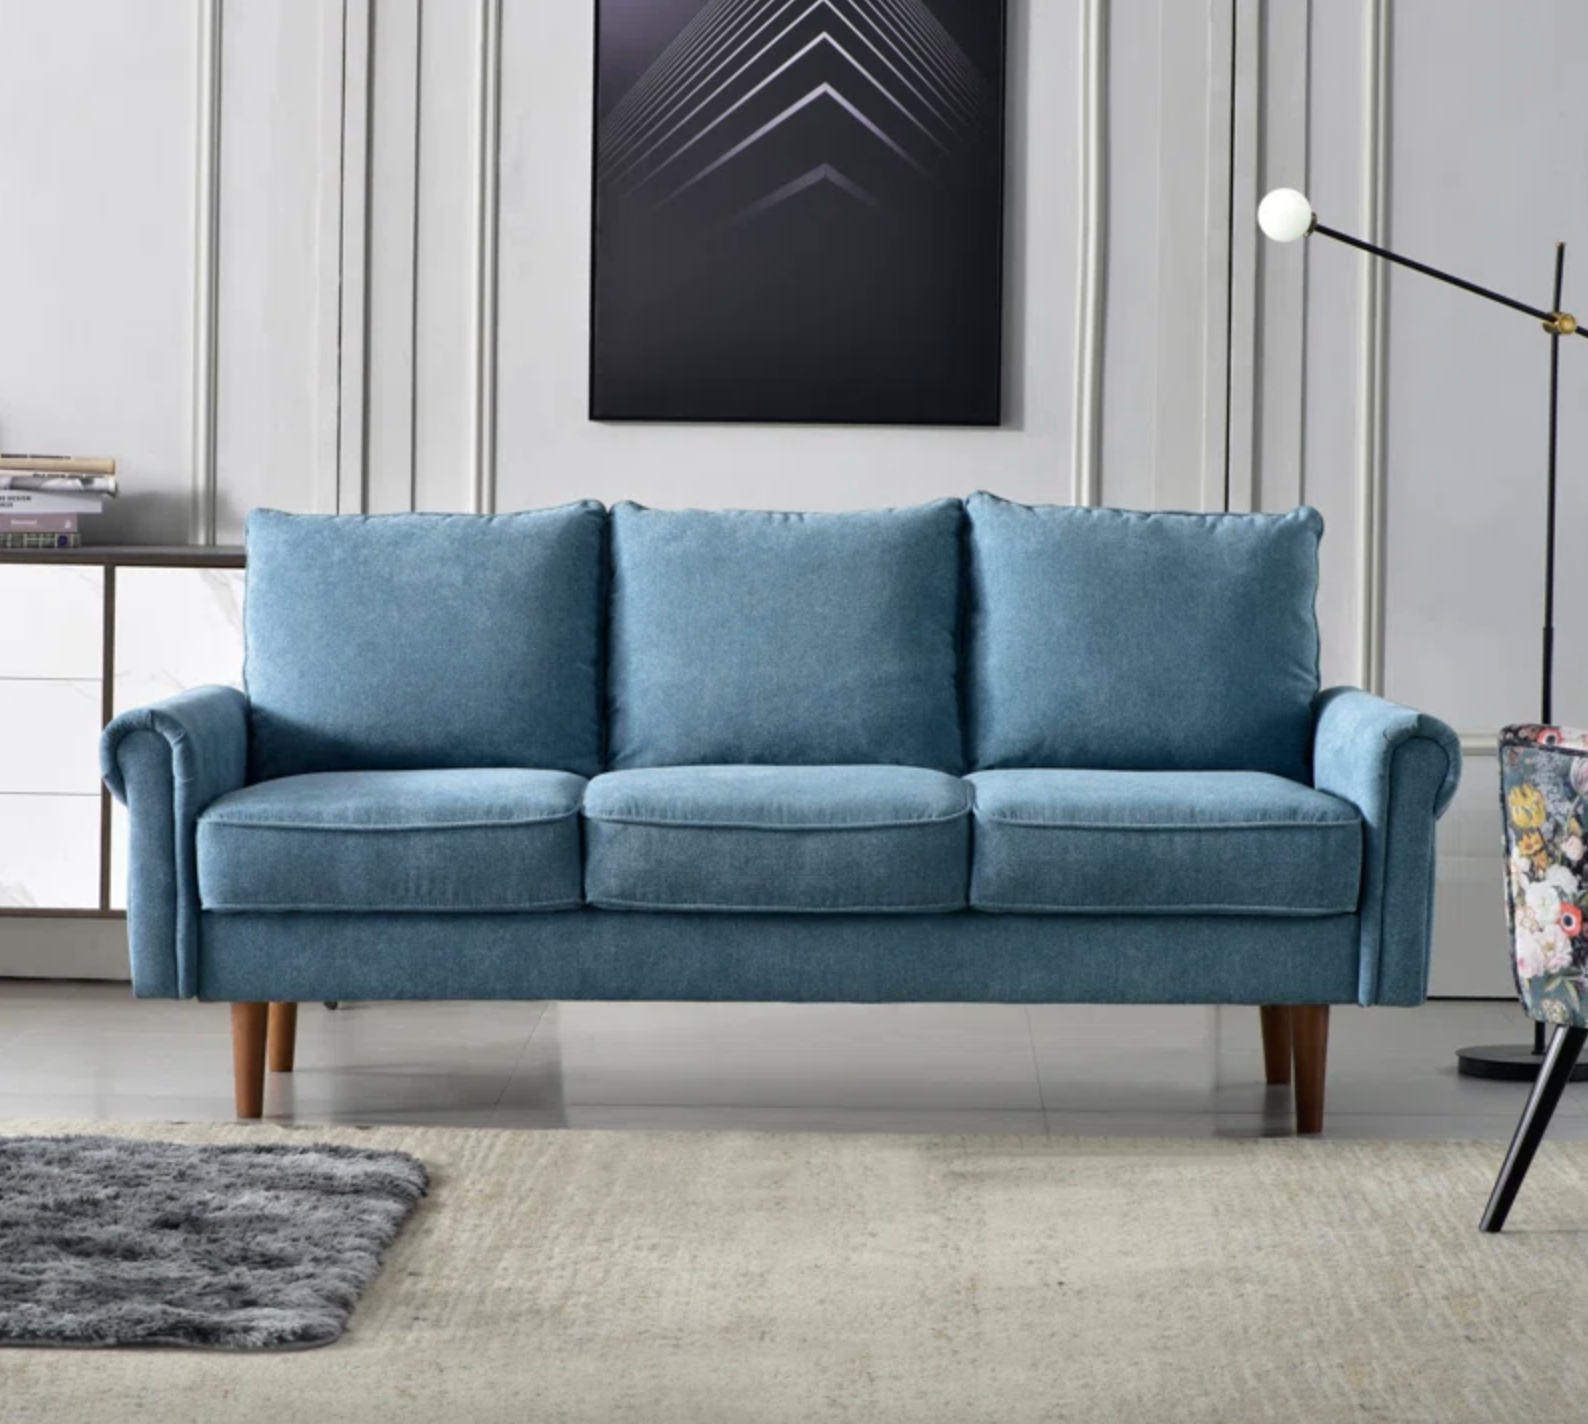 The Paulestein Denim 3 Pc. Power Sofa, Loveseat, Recliner sold at Hilton  Furniture serving Houston, TX ands surrounding areas.